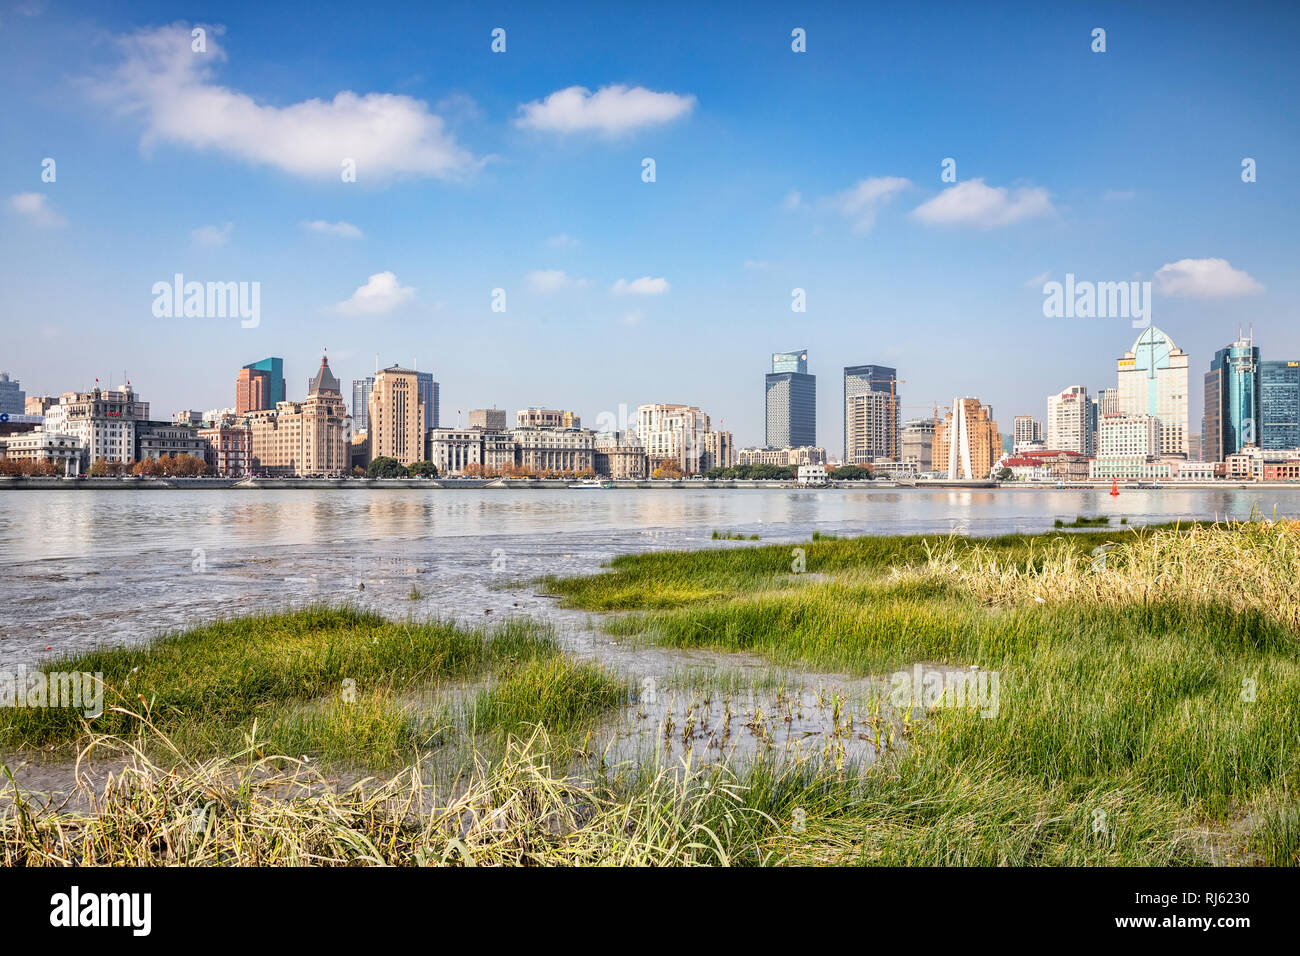 1 December 2018: Shanghai, China - The east bank of the Huangpu River on the Pudong side, opposite The Bund, Shanghai. Stock Photo